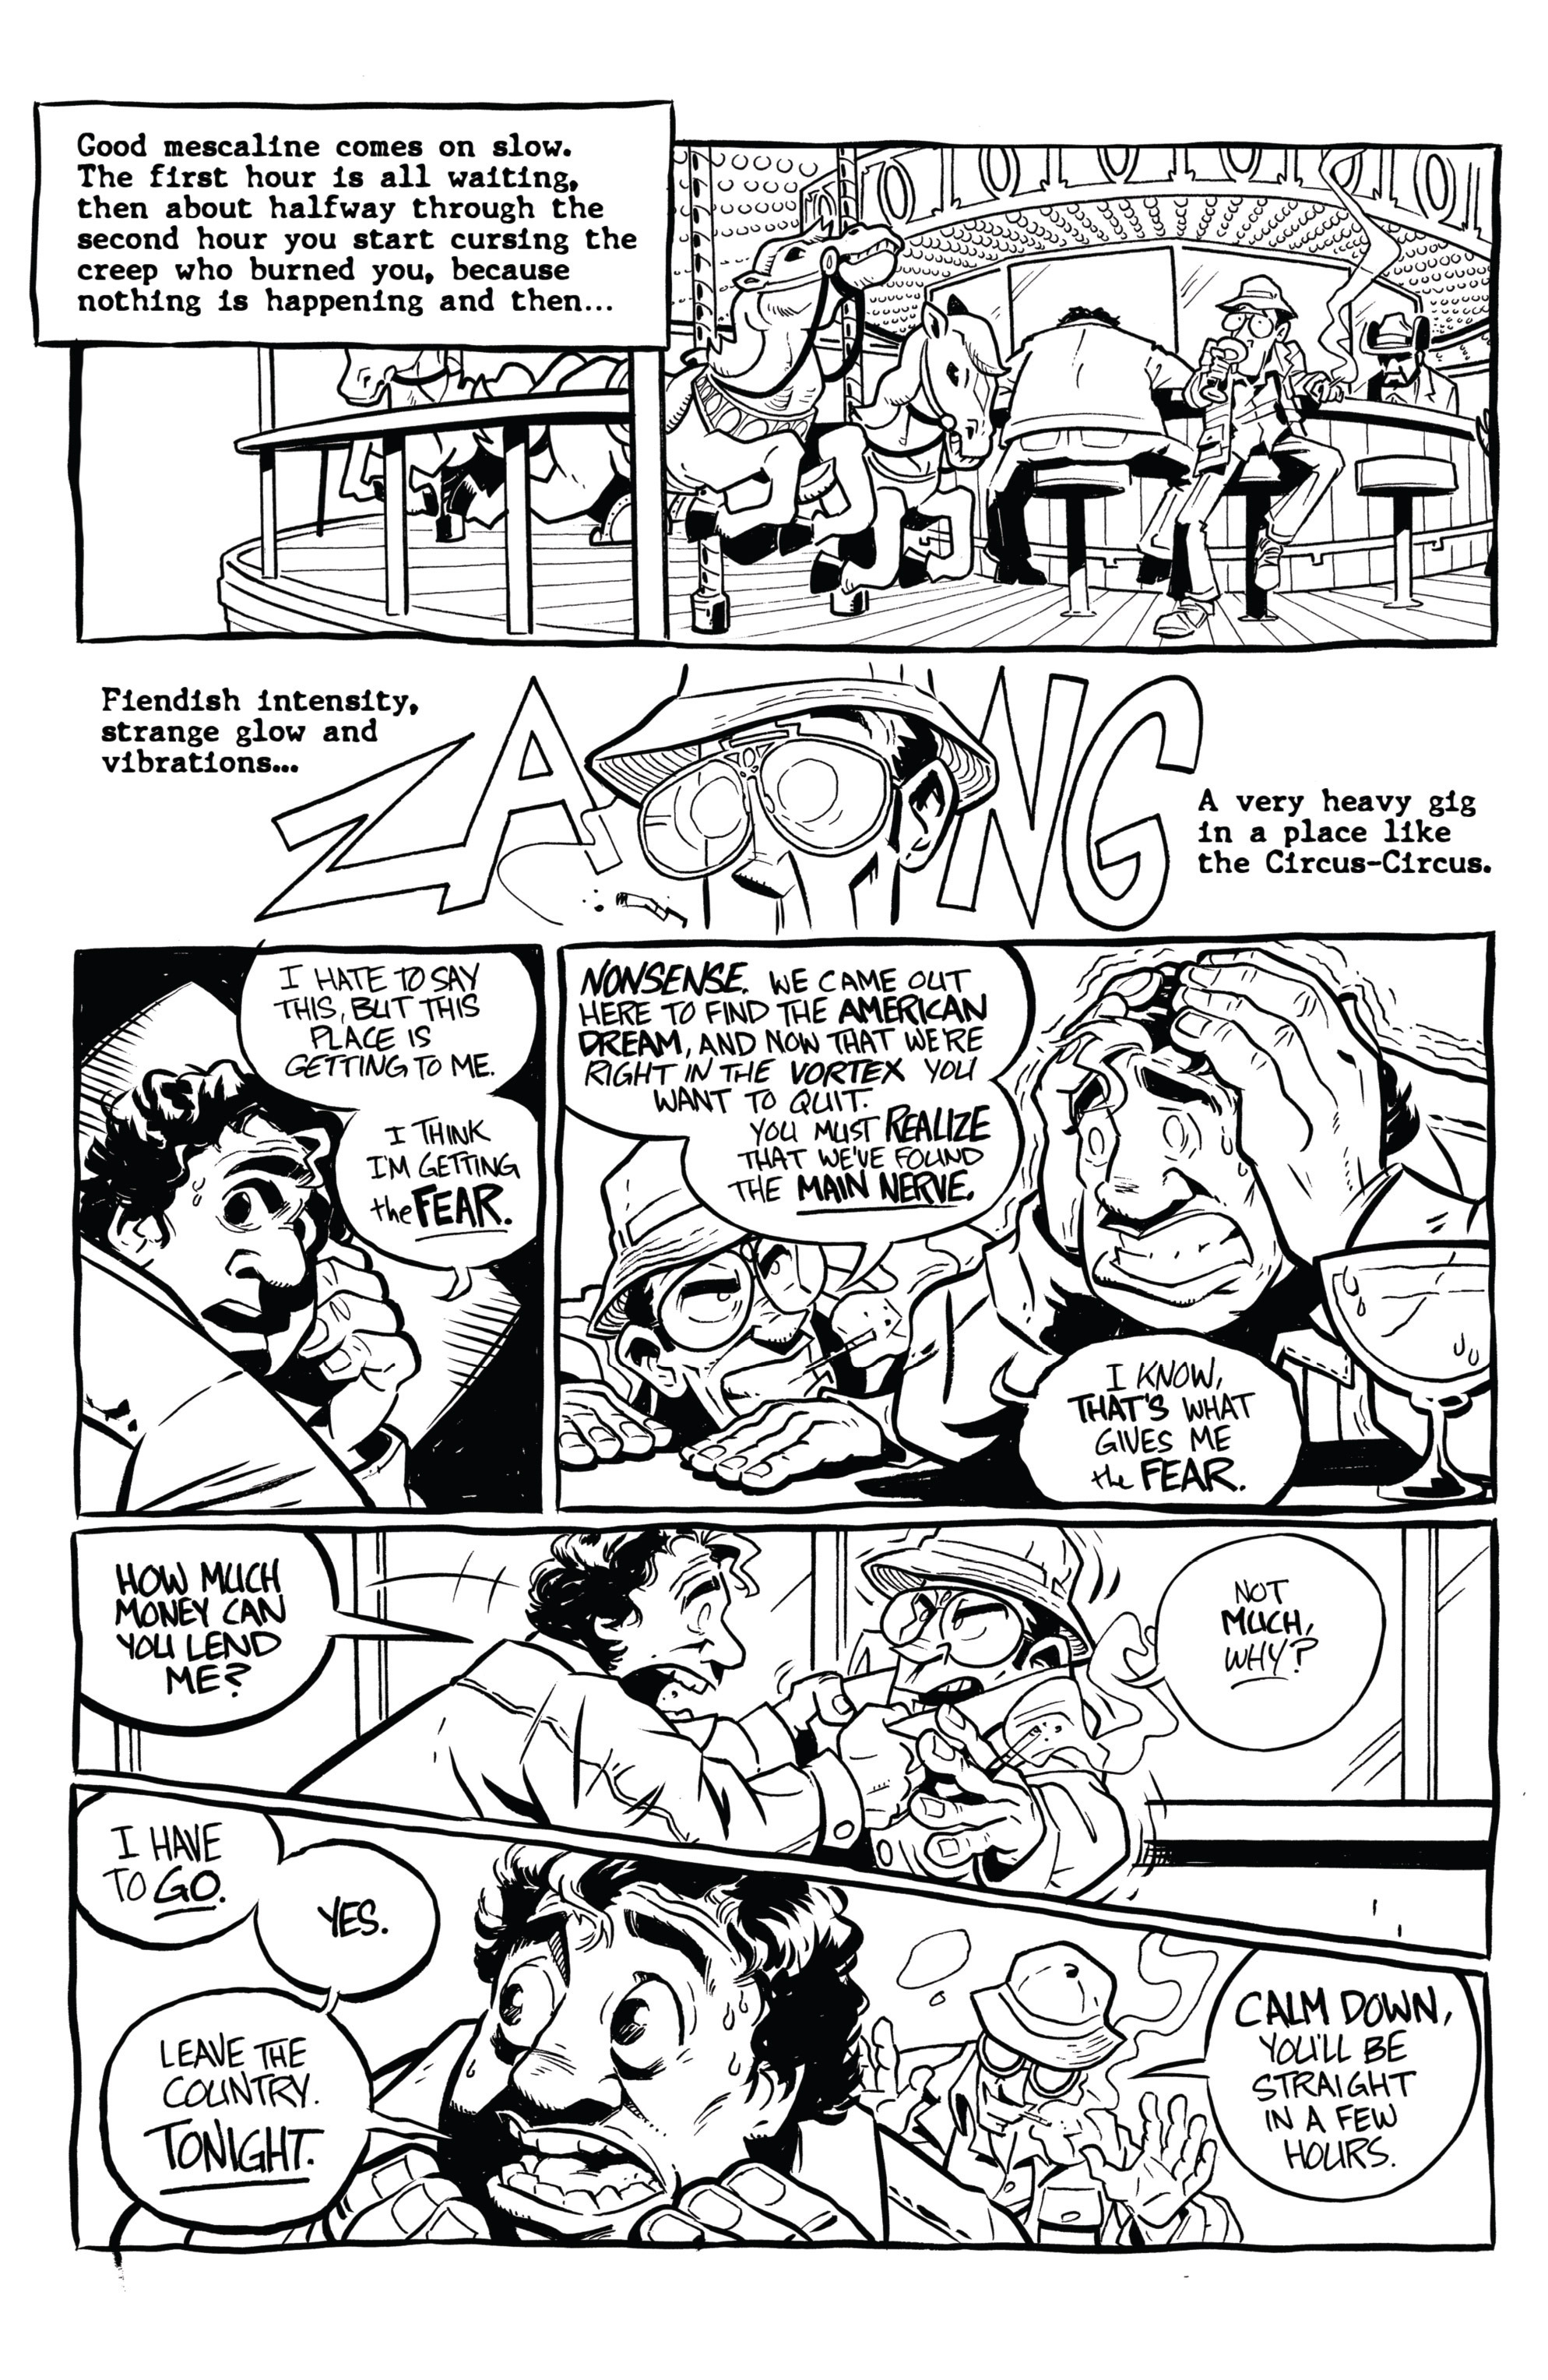 Read online Hunter S. Thompson's Fear and Loathing in Las Vegas comic -  Issue #2 - 13